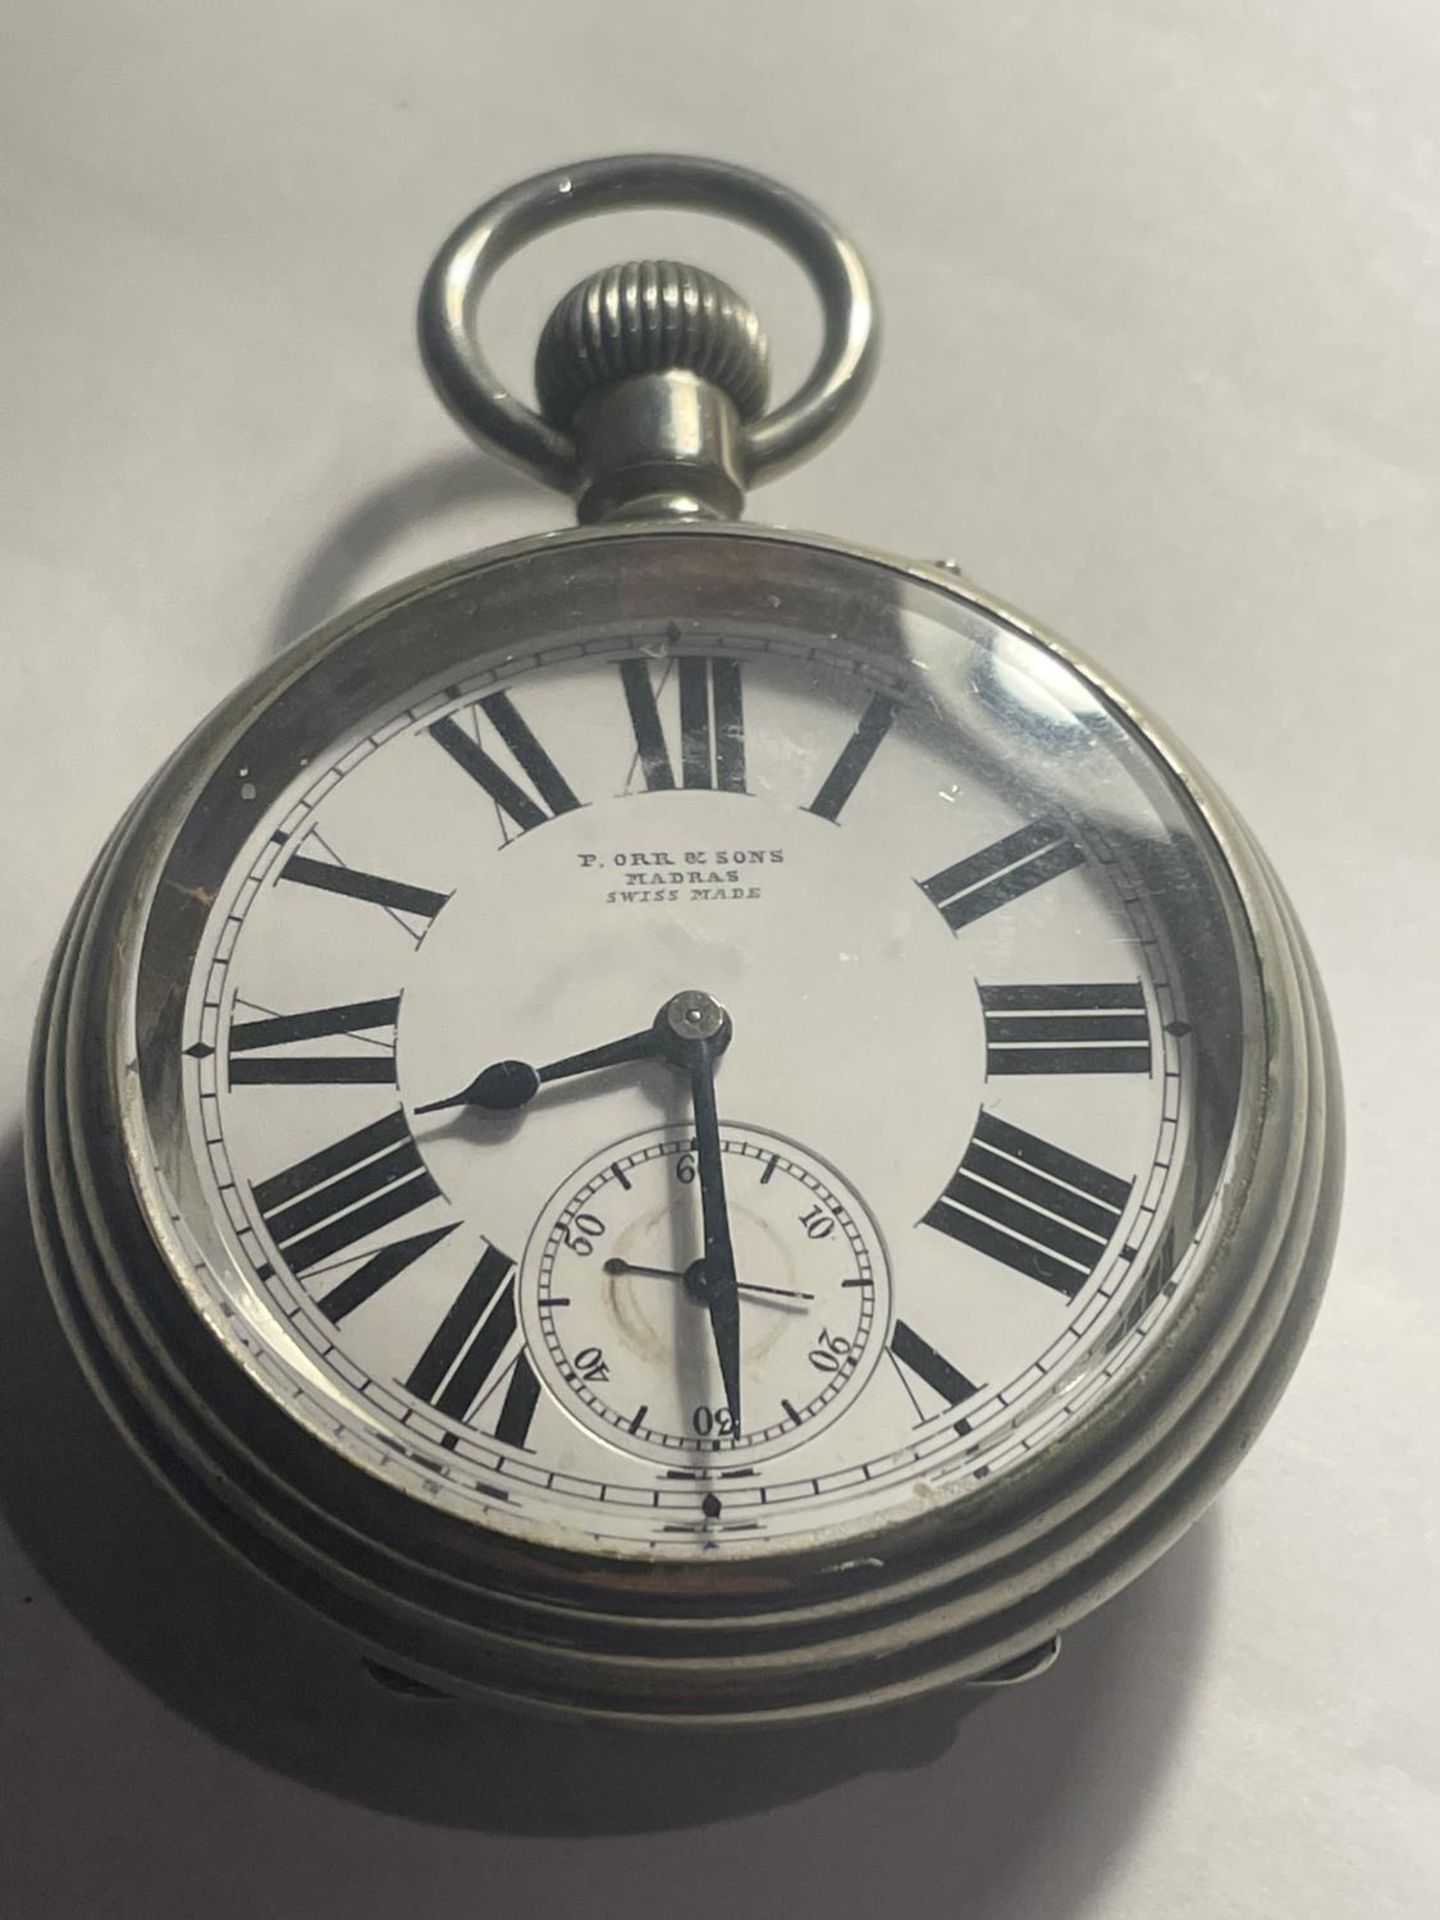 AN EARLY 20TH CENTURY POCKET WATCH SEEN WORKING BUT NO WARRANTY